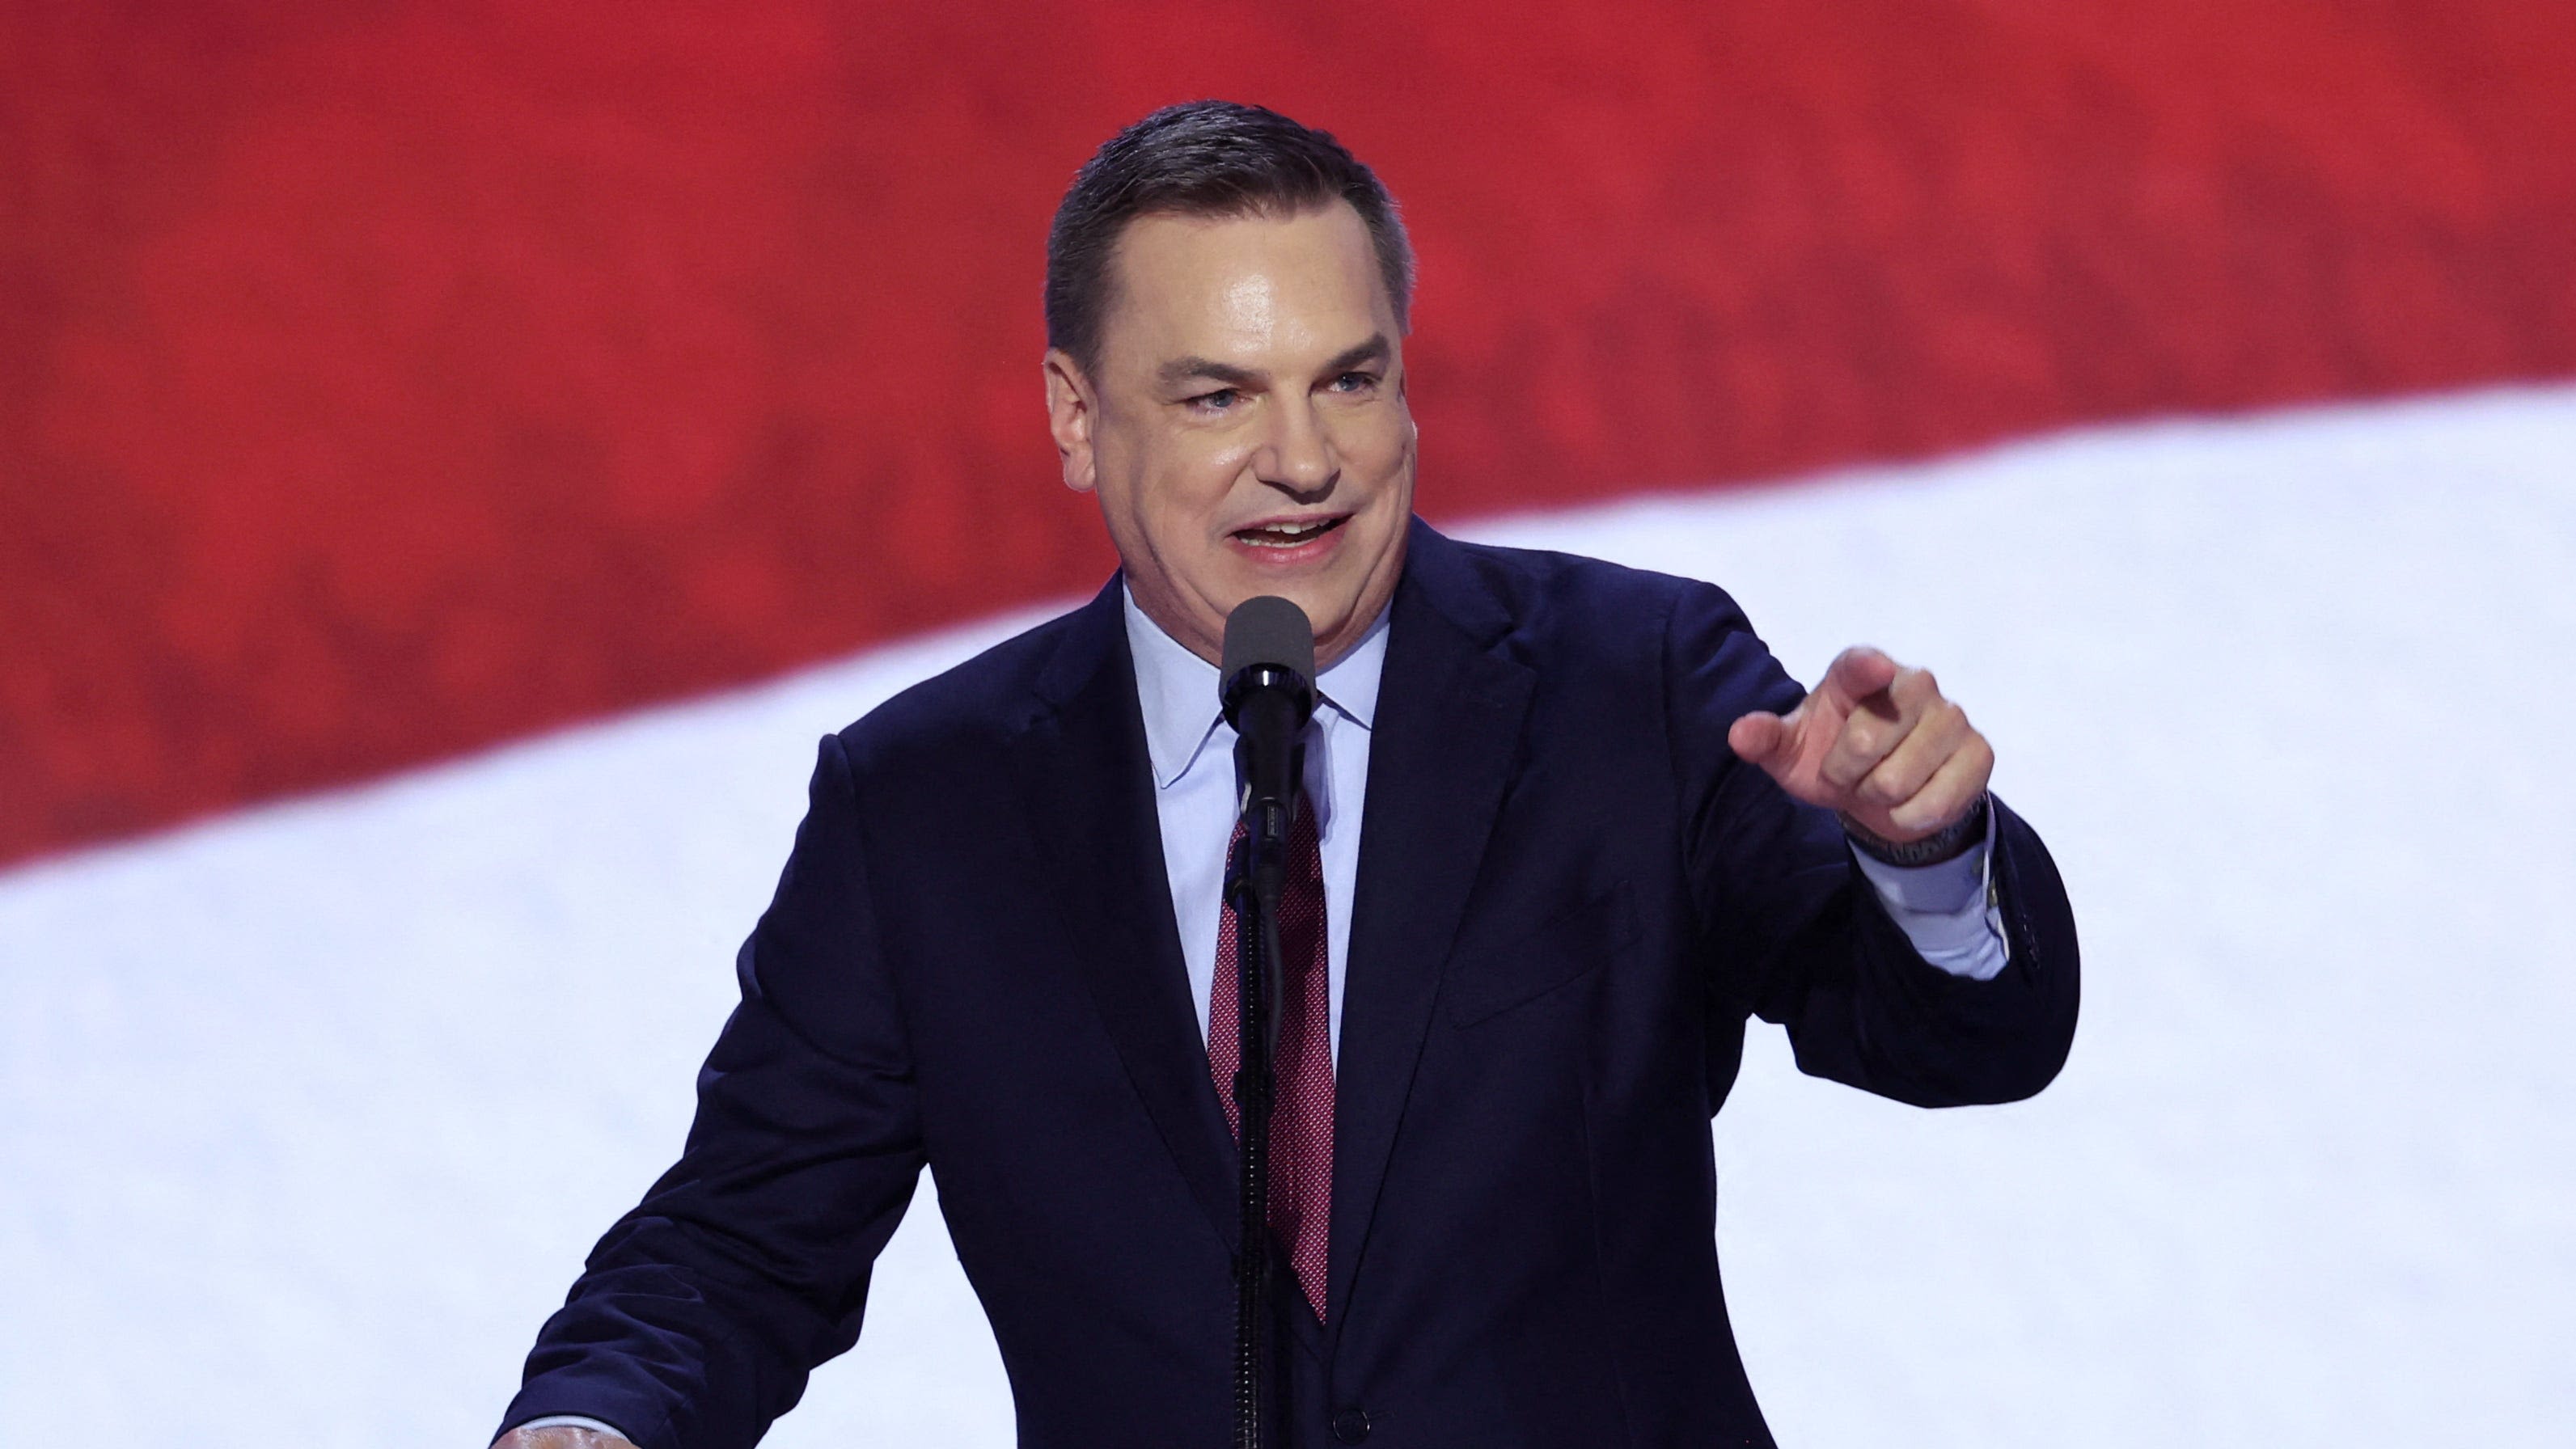 Watch US Rep. Richard Hudson's speech at the Republican National Convention